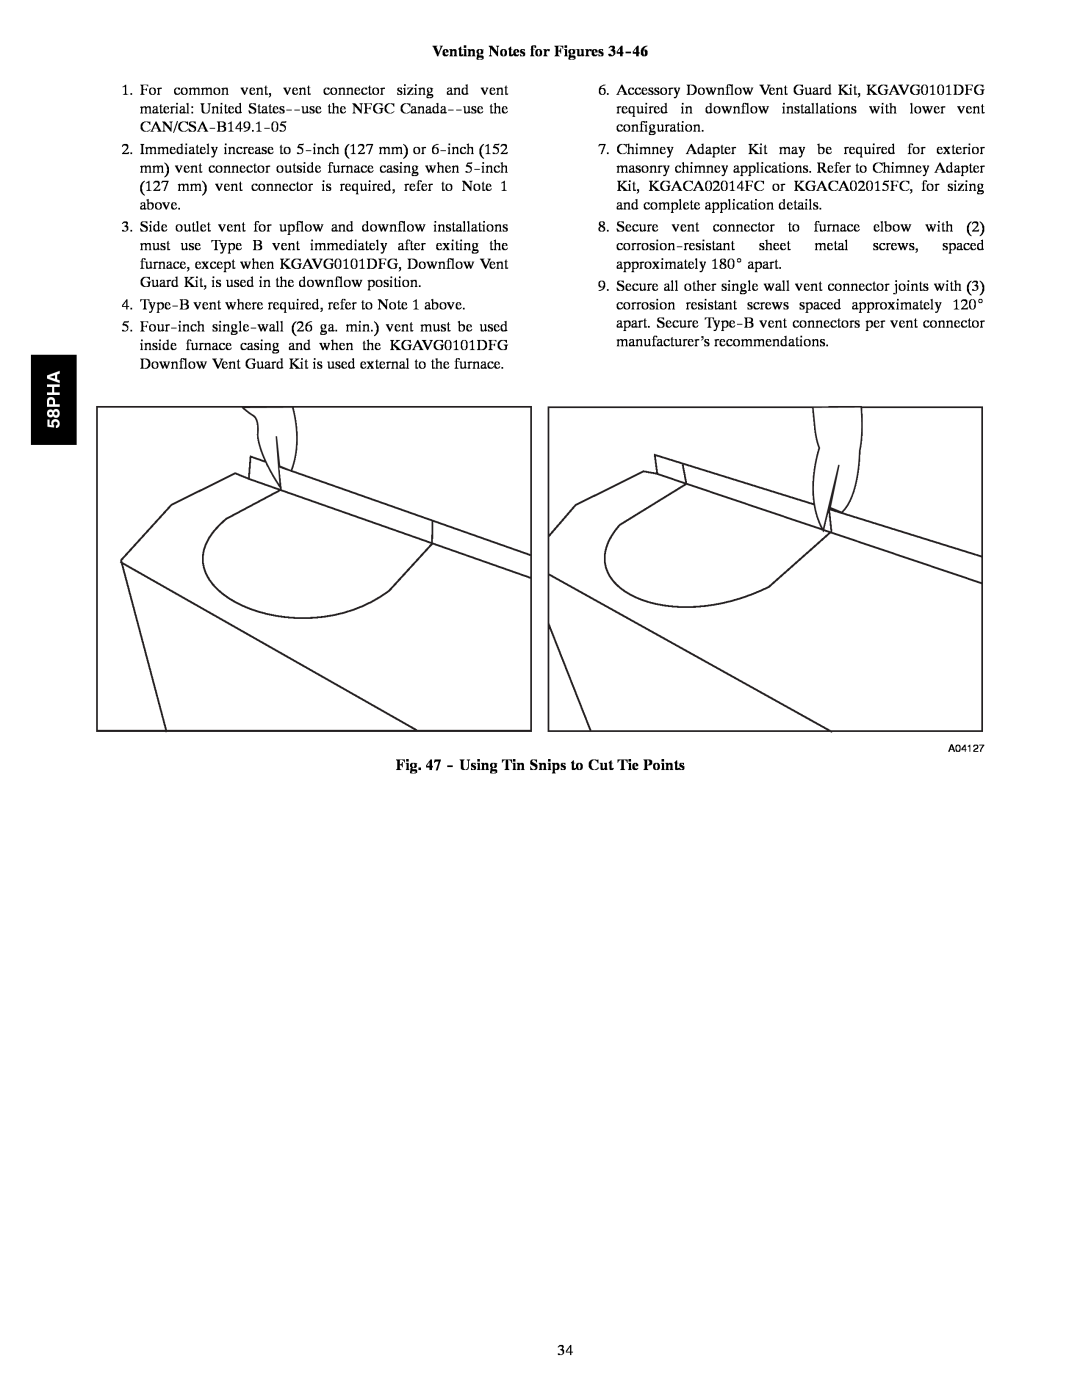 Carrier 58PHA/PHX instruction manual Venting Notes for Figures, Using Tin Snips to Cut Tie Points 